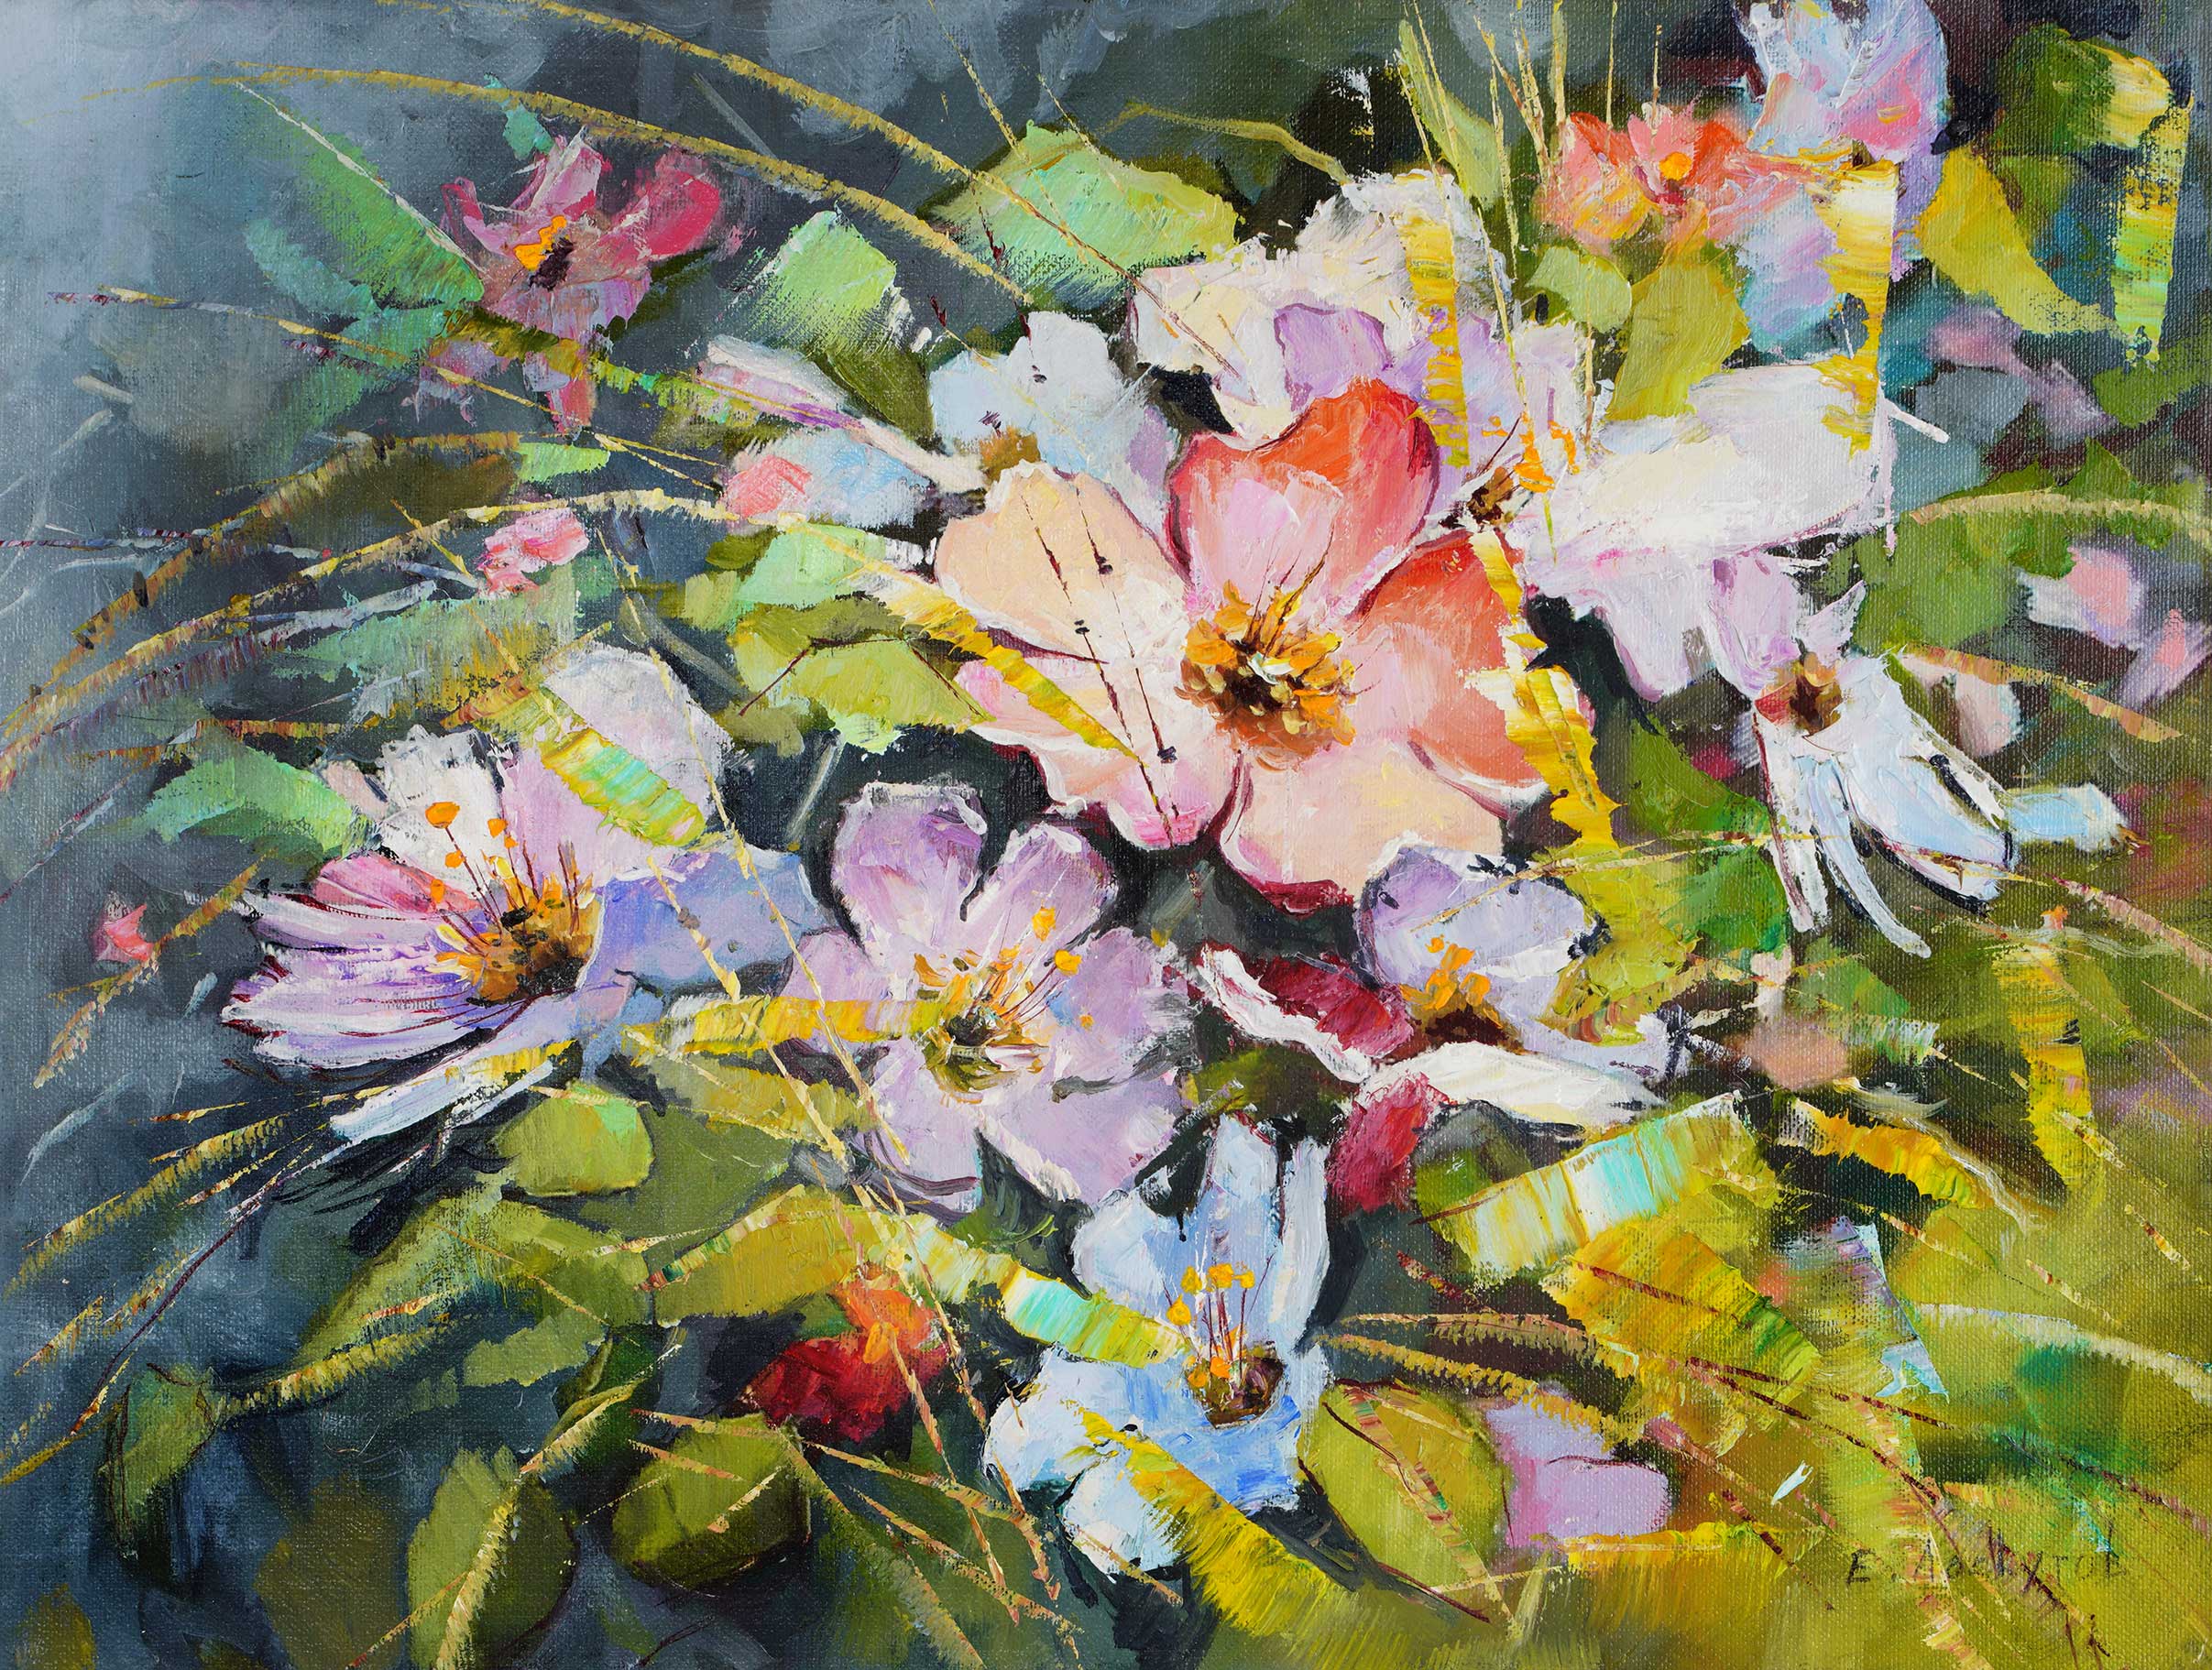 Floral arrangement - 1, Evgeny Loskutov, Buy the painting Oil